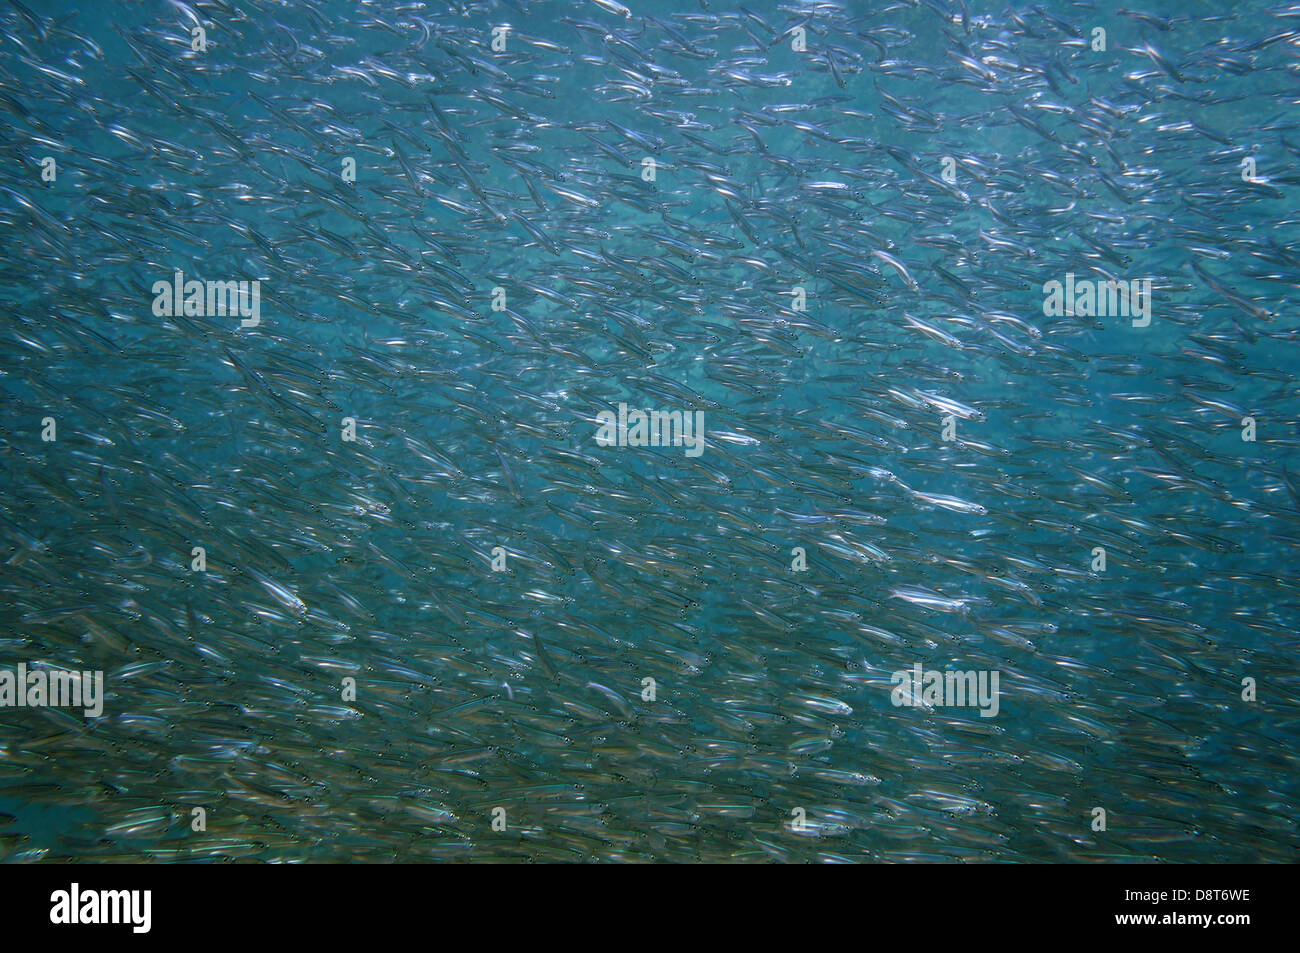 Large shoal of young fish swimming together, Atlantic ocean Stock Photo